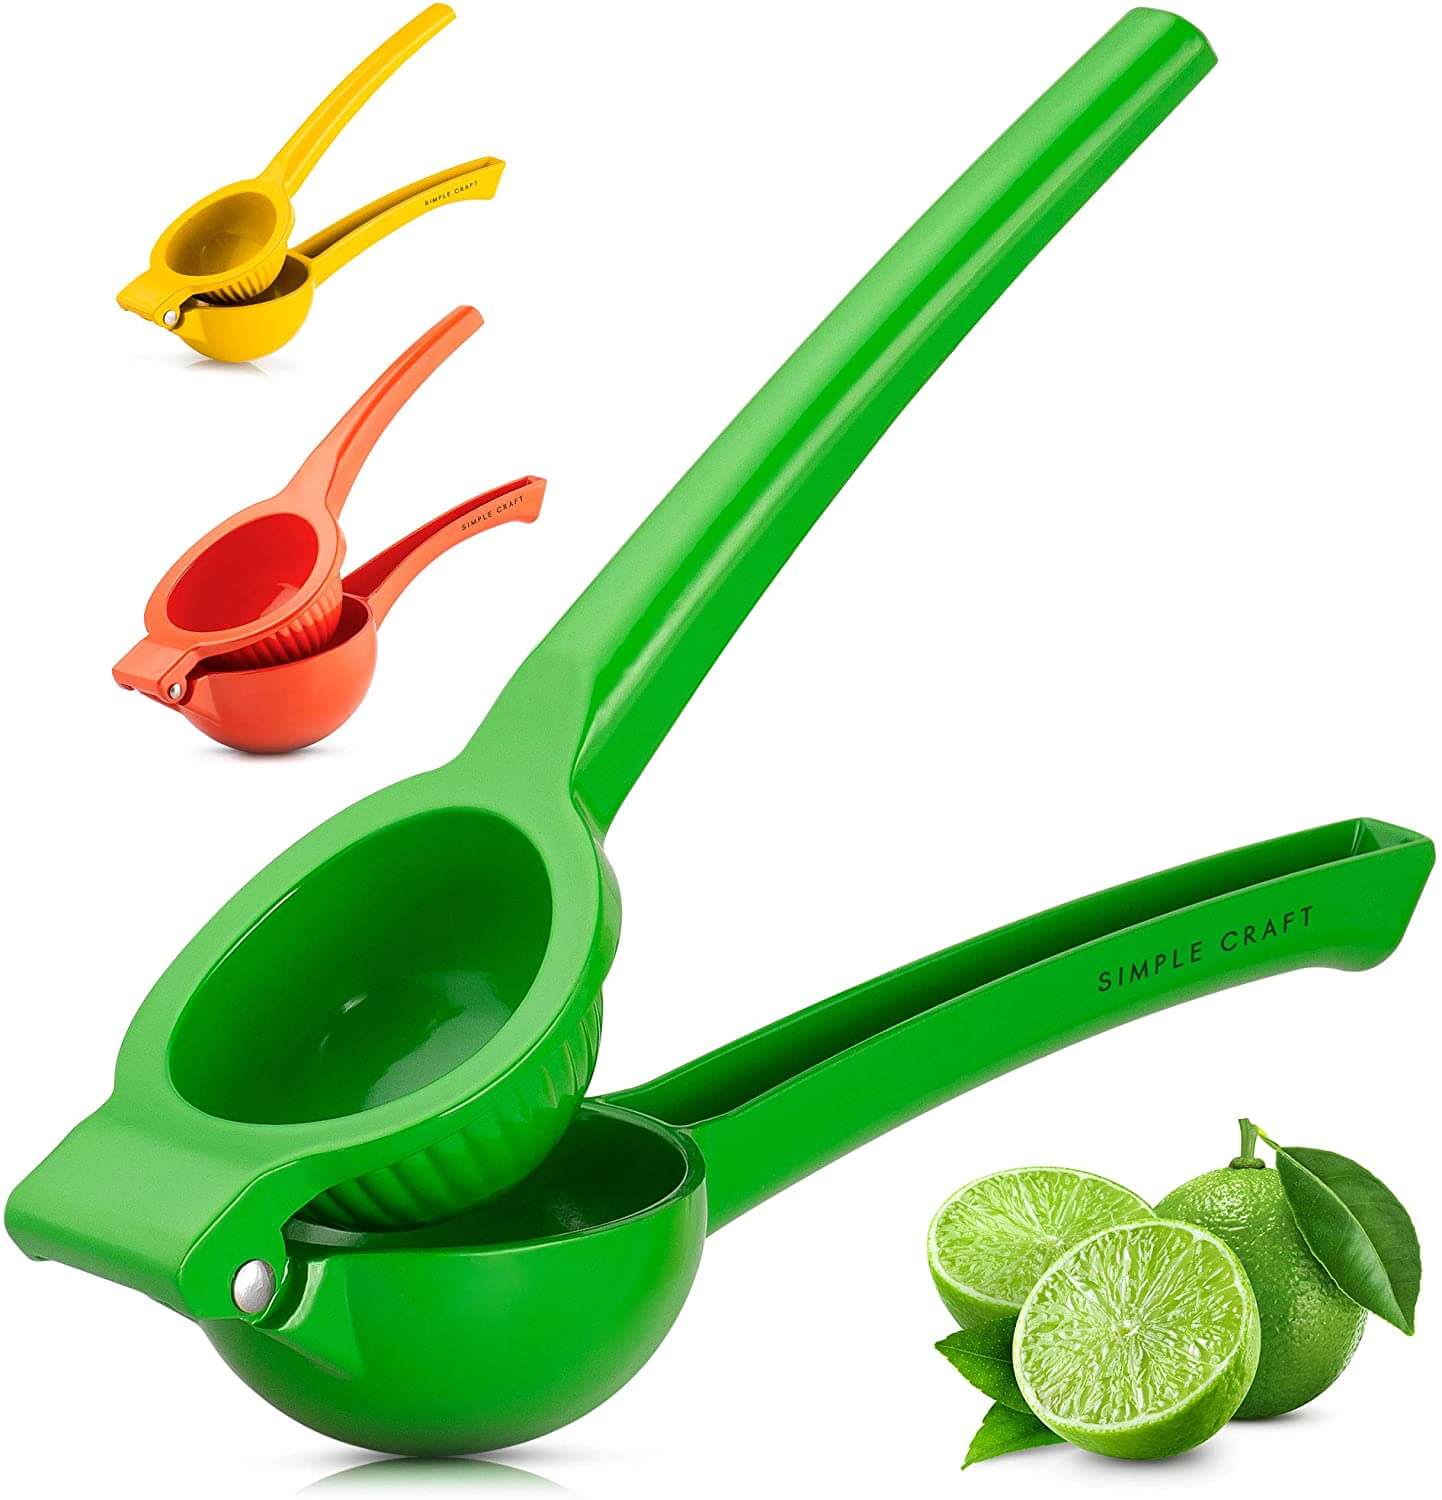 Simple Craft Lemon Squeezer - Single Bowl from Zulay Kitchen